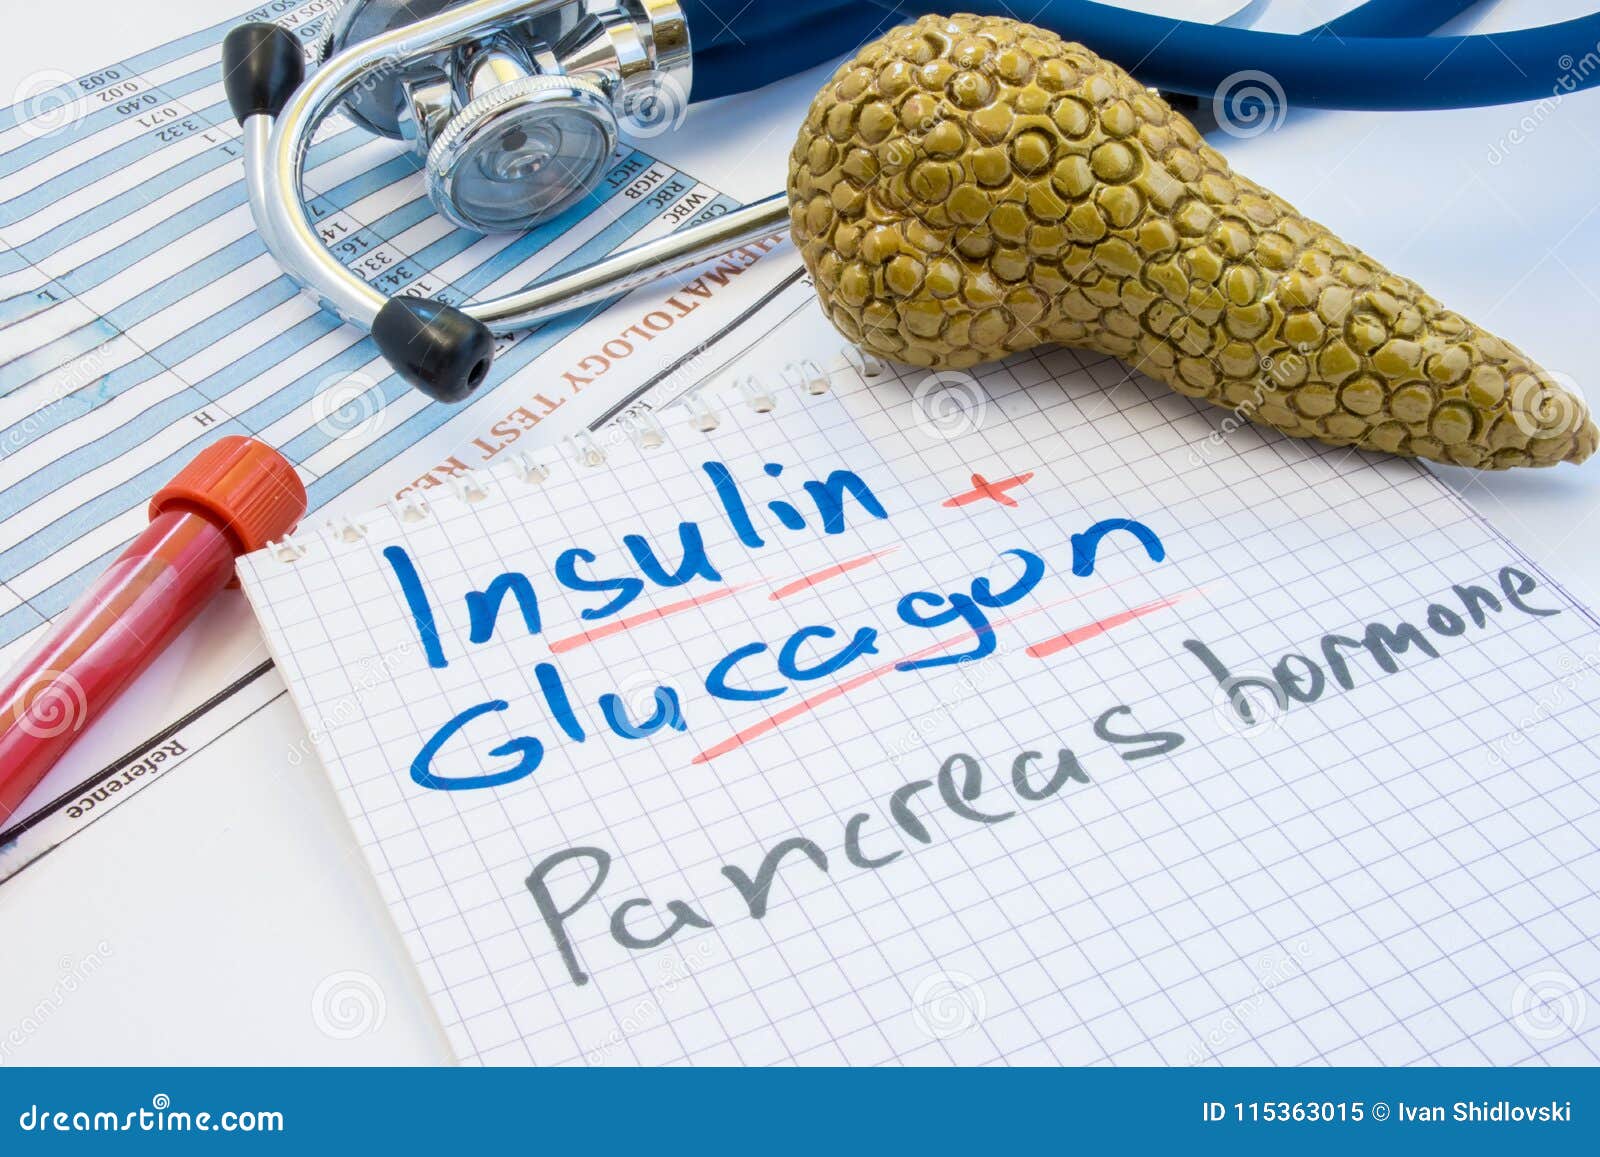 pancreas gland hormones insulin and glucagon concept photo. notepad inscribed with insulin and glucagon is near figures of pancrea